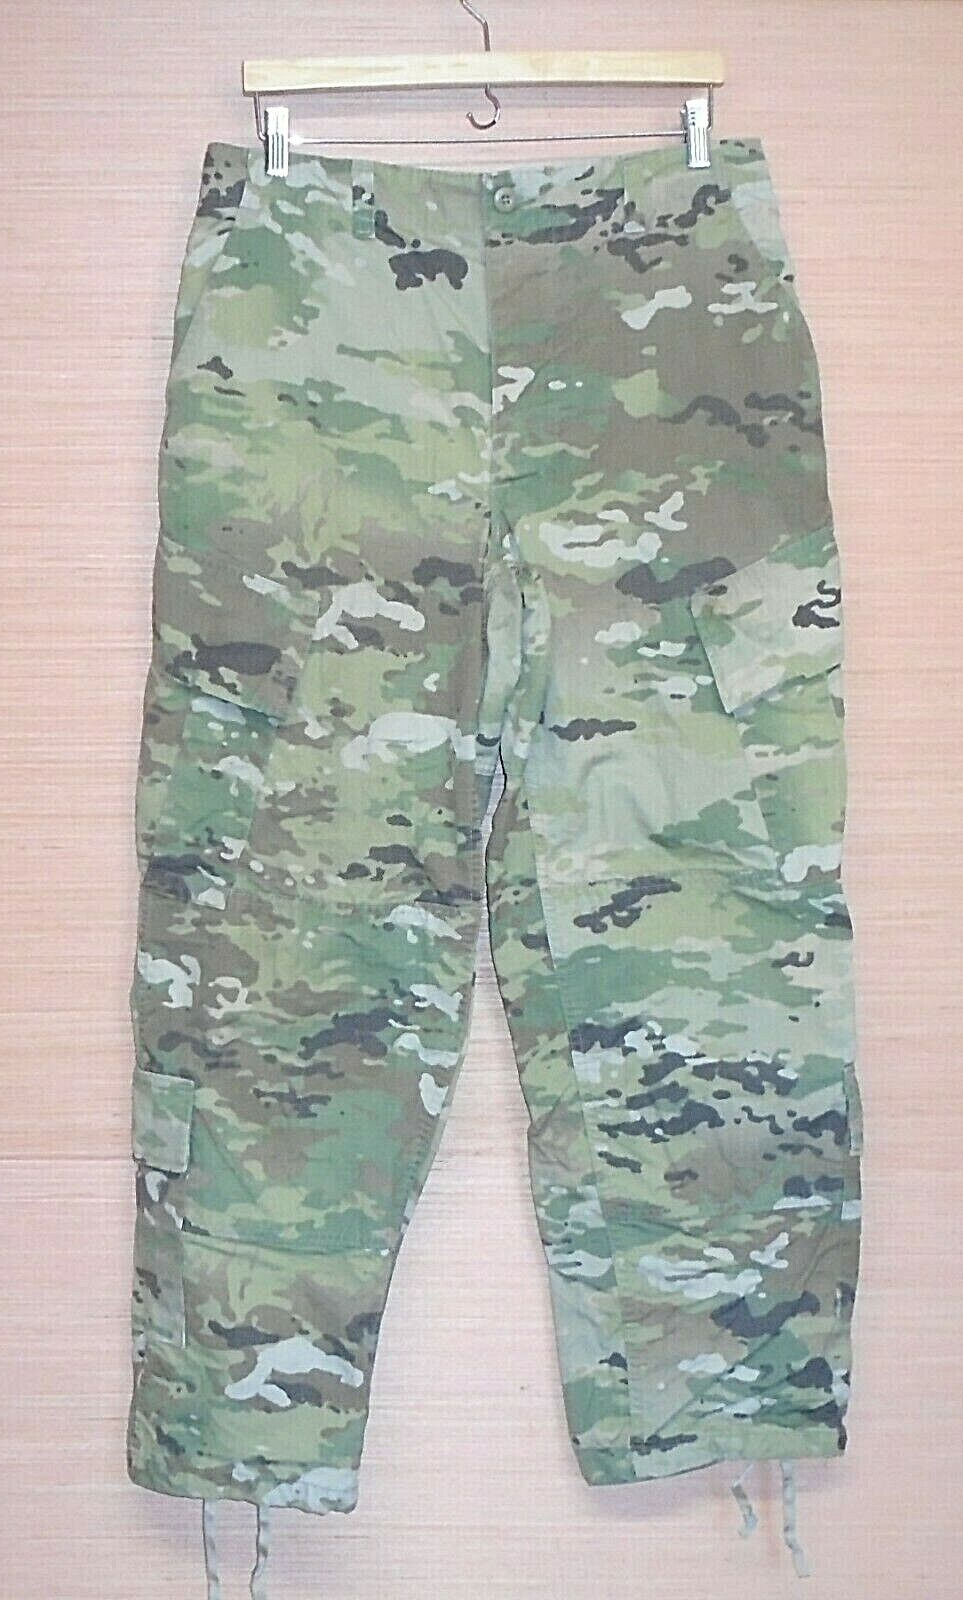 US Military Issue Unisex Army OCP Camouflage Combat Pants Trousers Medium Short